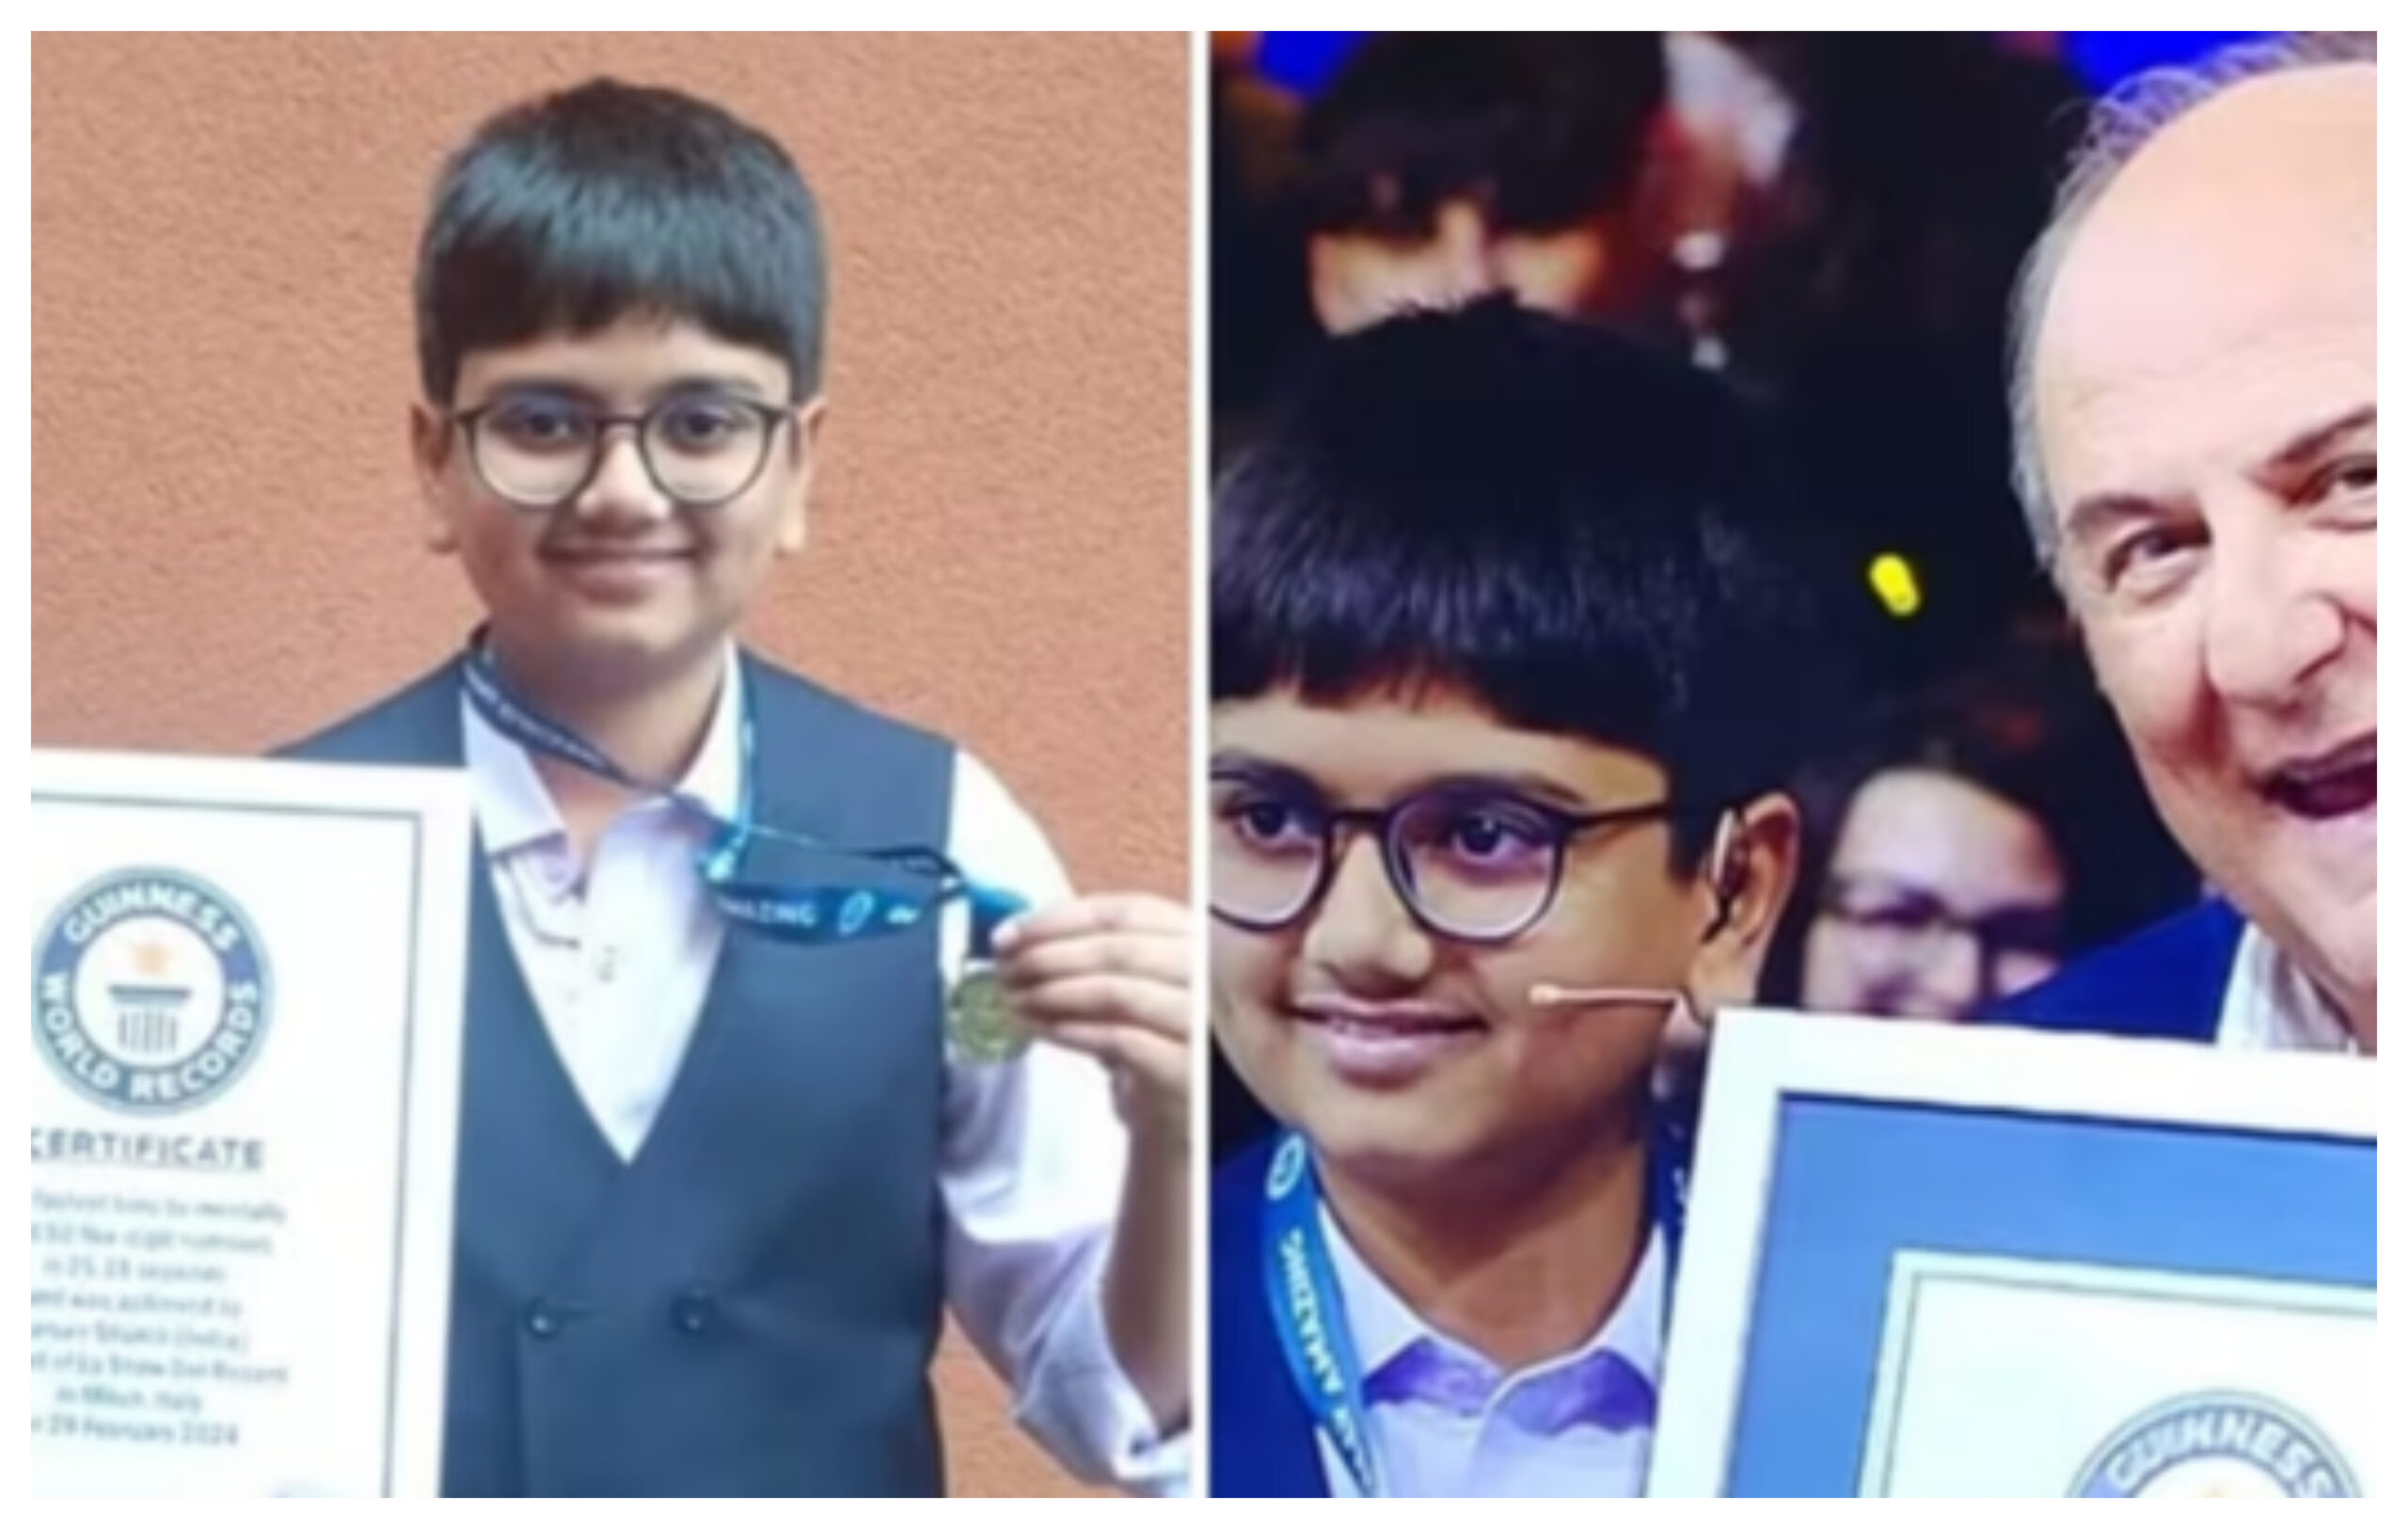 Maharashtra: Eighth class student created history, made 'Guinness World Record' for the fastest mental addition, World Record, Guinness World Record, Fastest Mental Addition, DPS Nasik, Aryan Shukla, Maharashtra, totaltv news in hindi